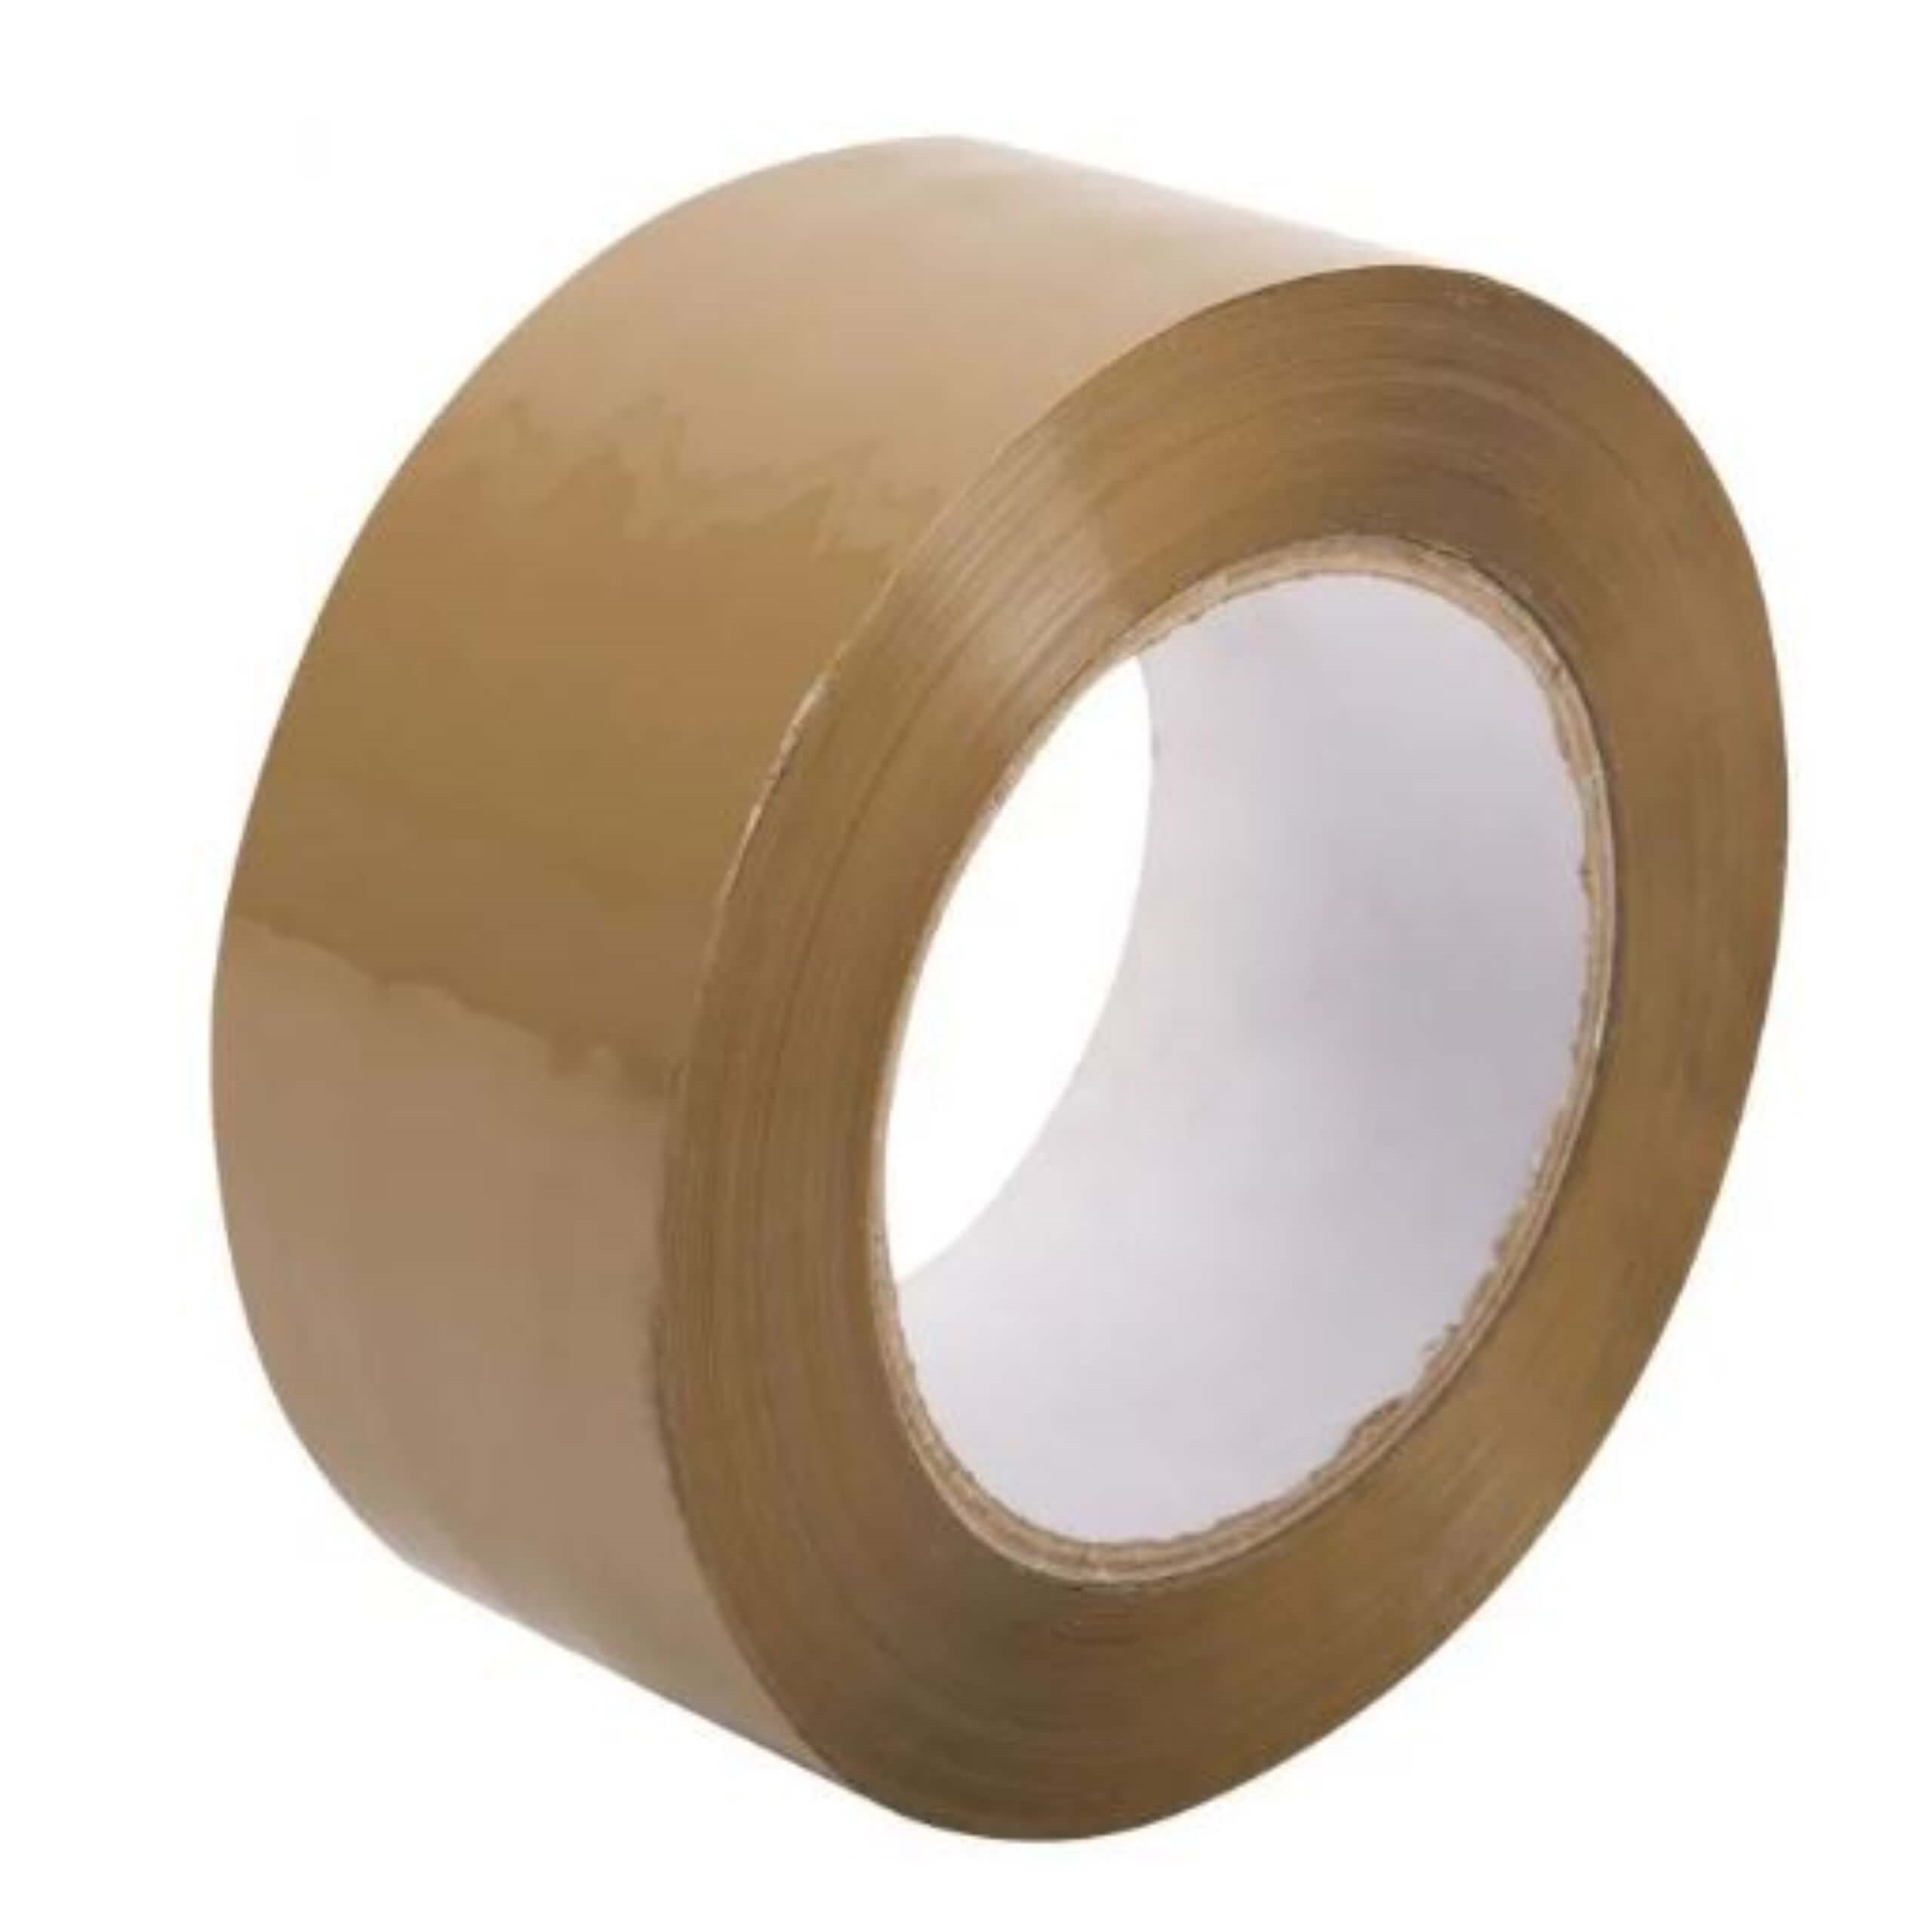 An image of polyprop tape.